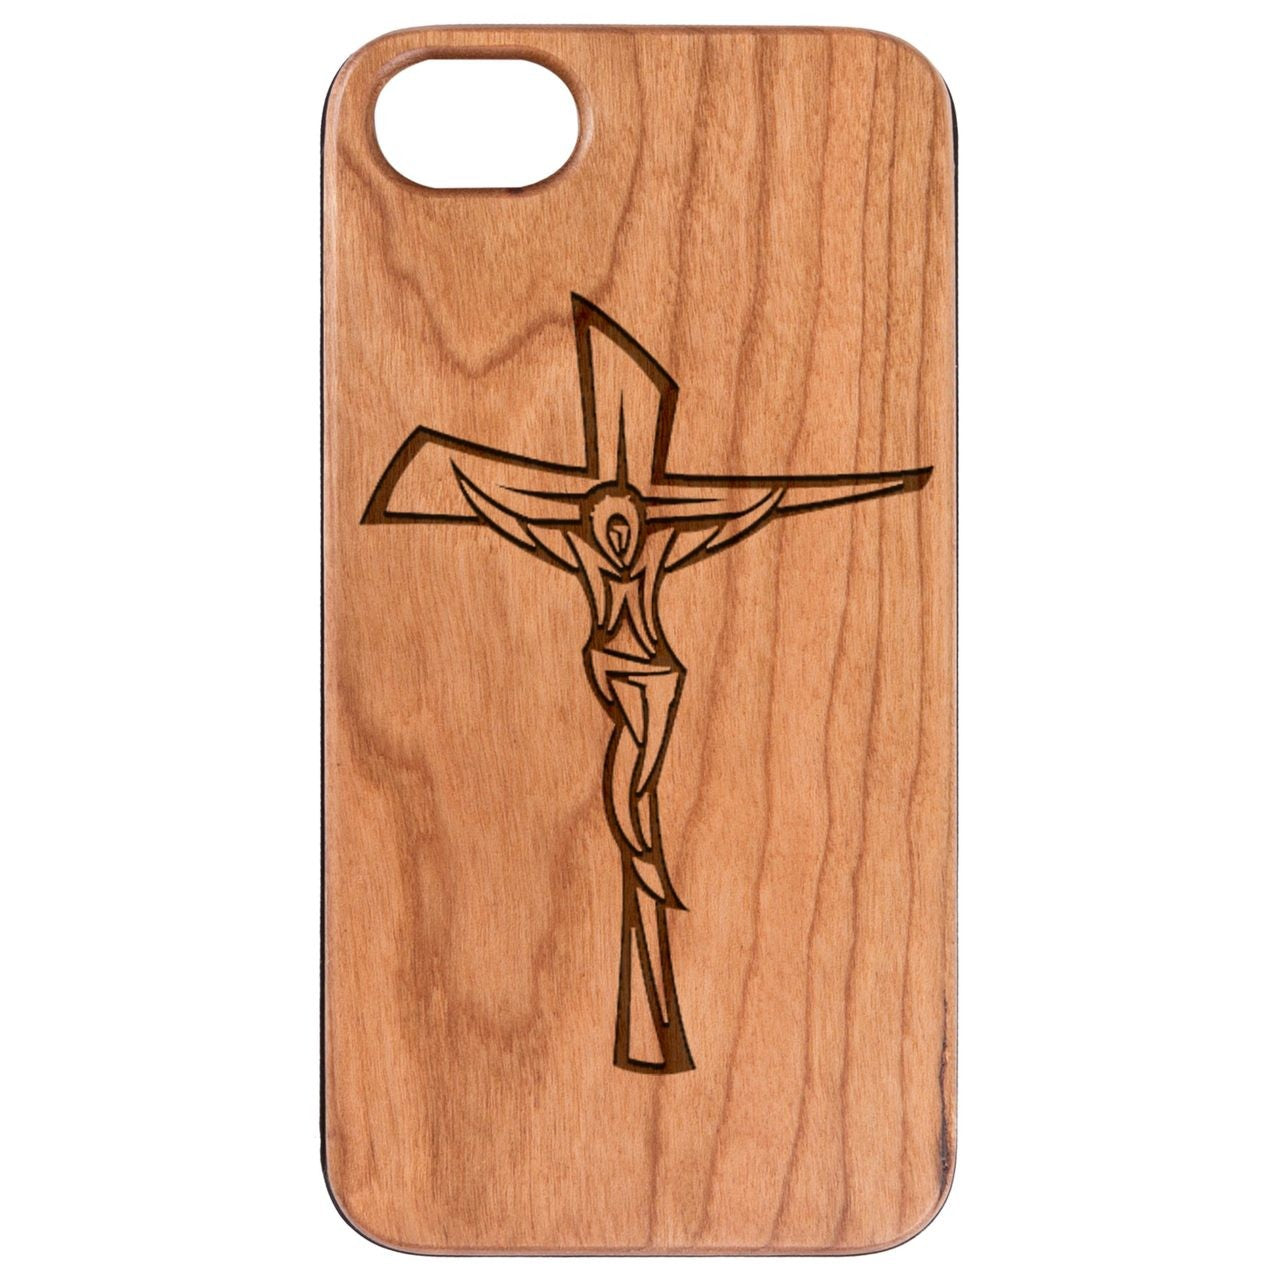  Crucifix - Engraved - Wooden Phone Case - IPhone 13 Models